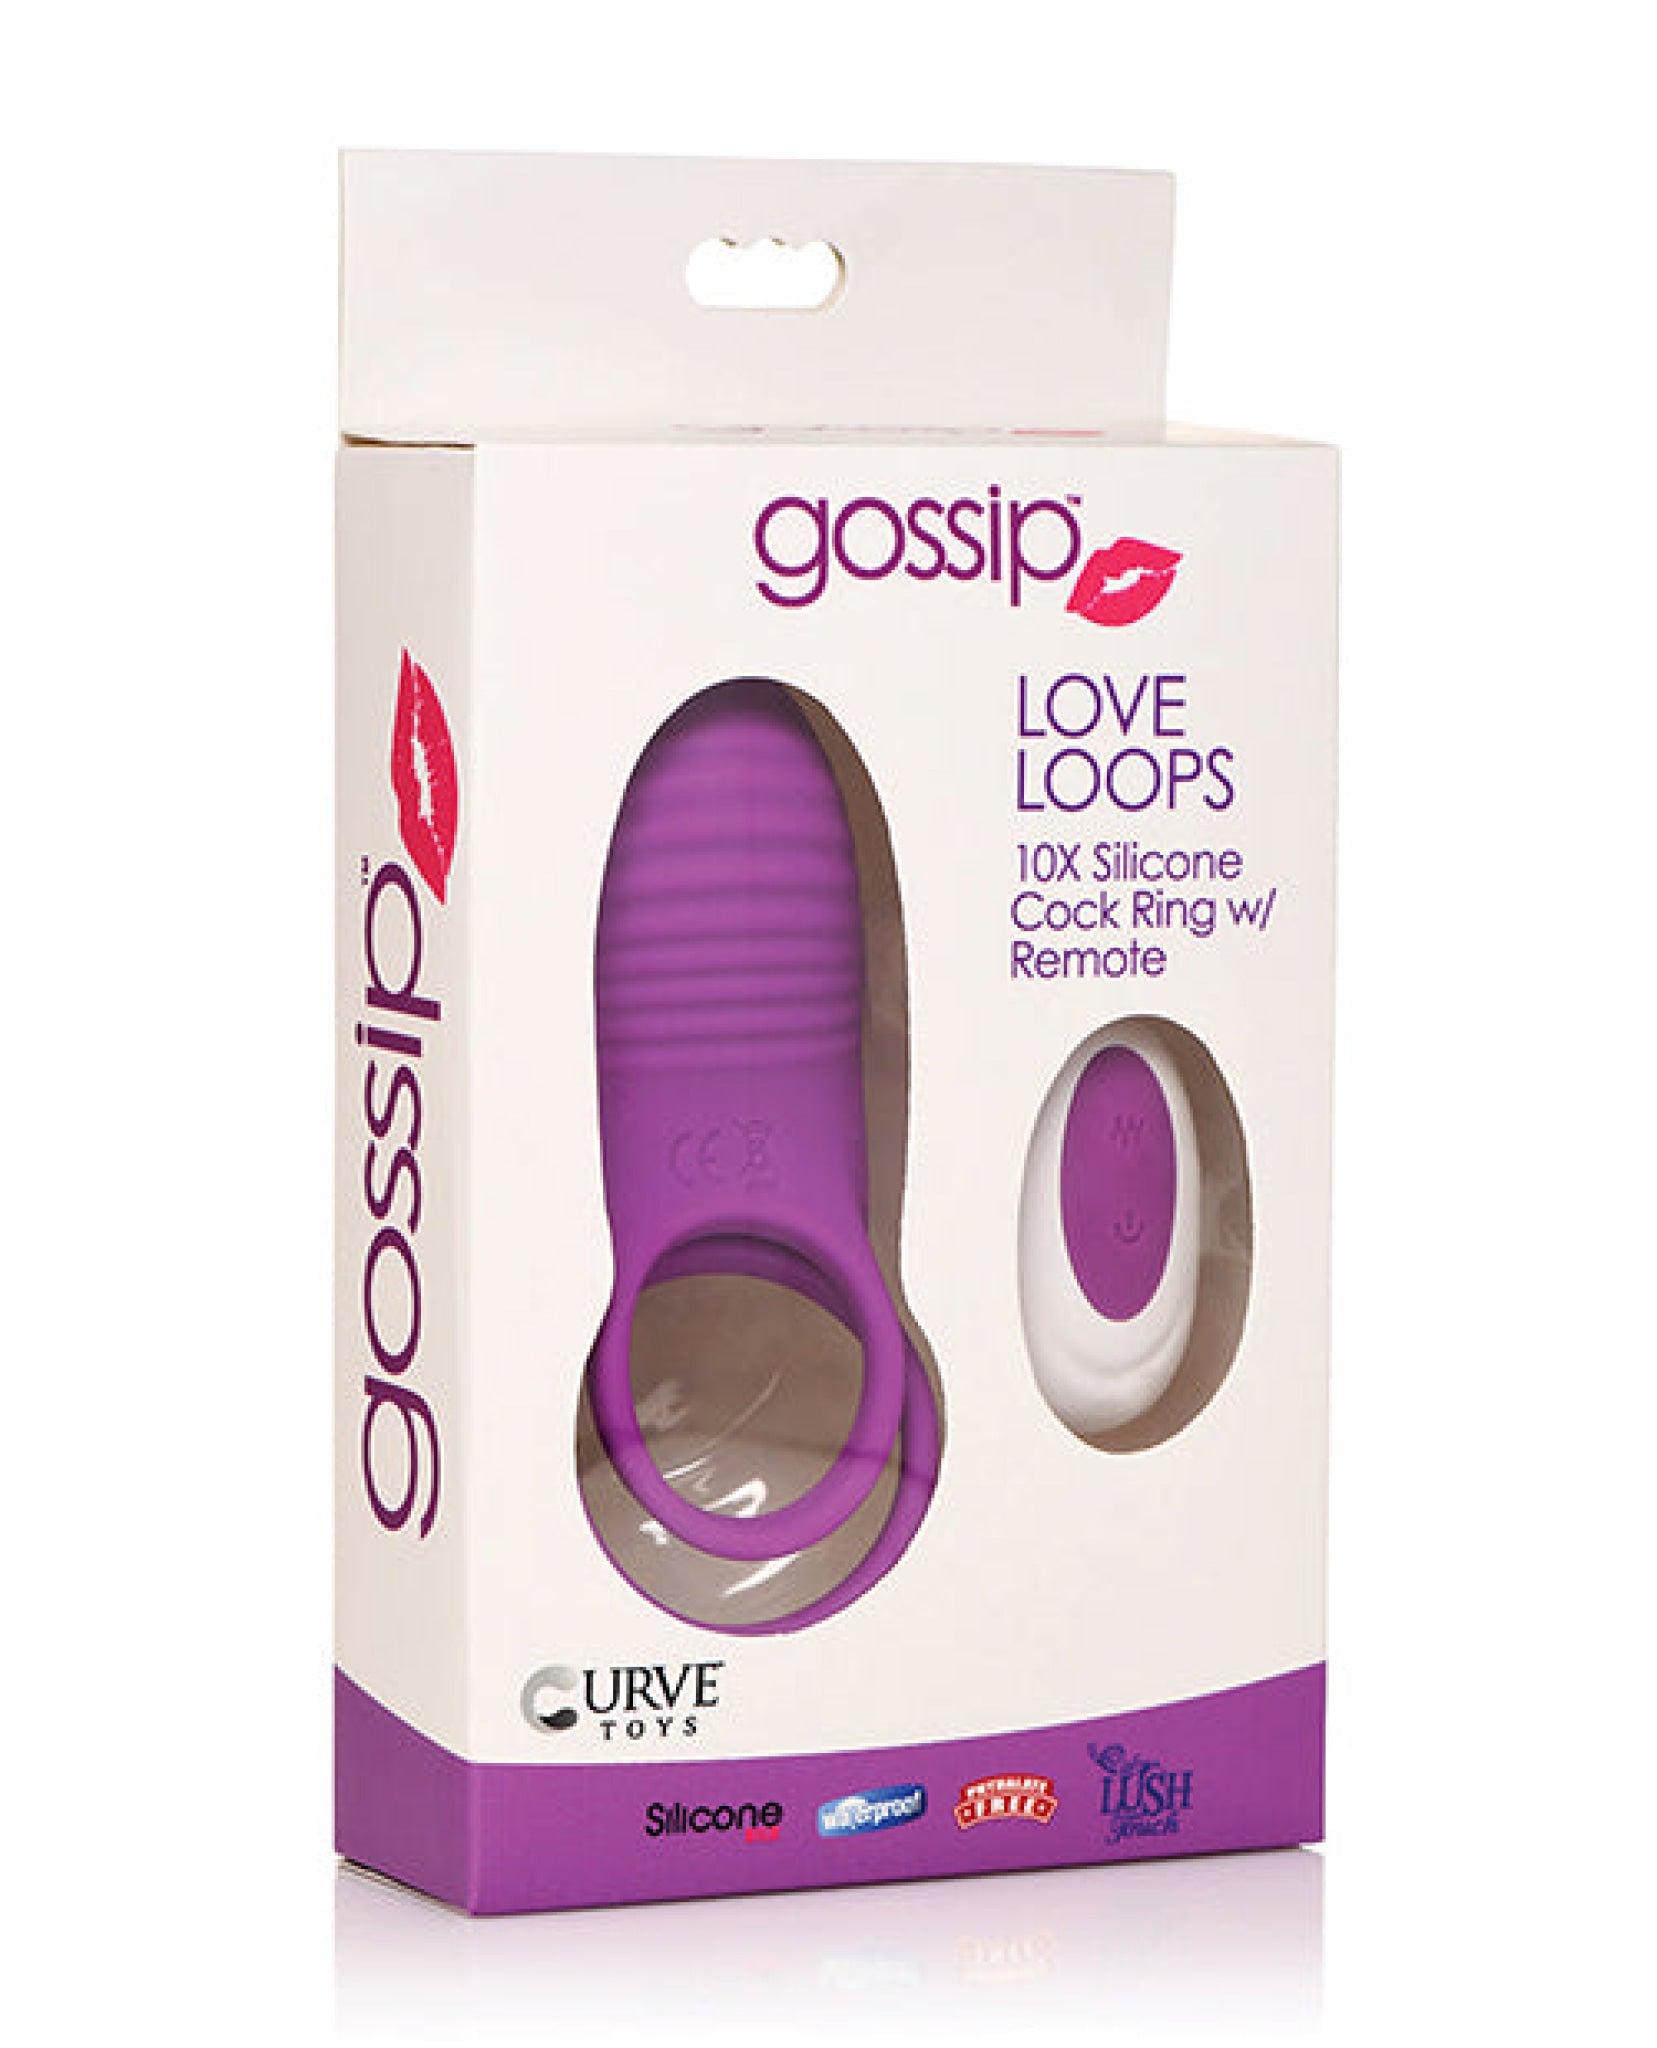 Curve Toys Gossip Love Loops 10x Silicone Cock Ring W/remote Curve Toys